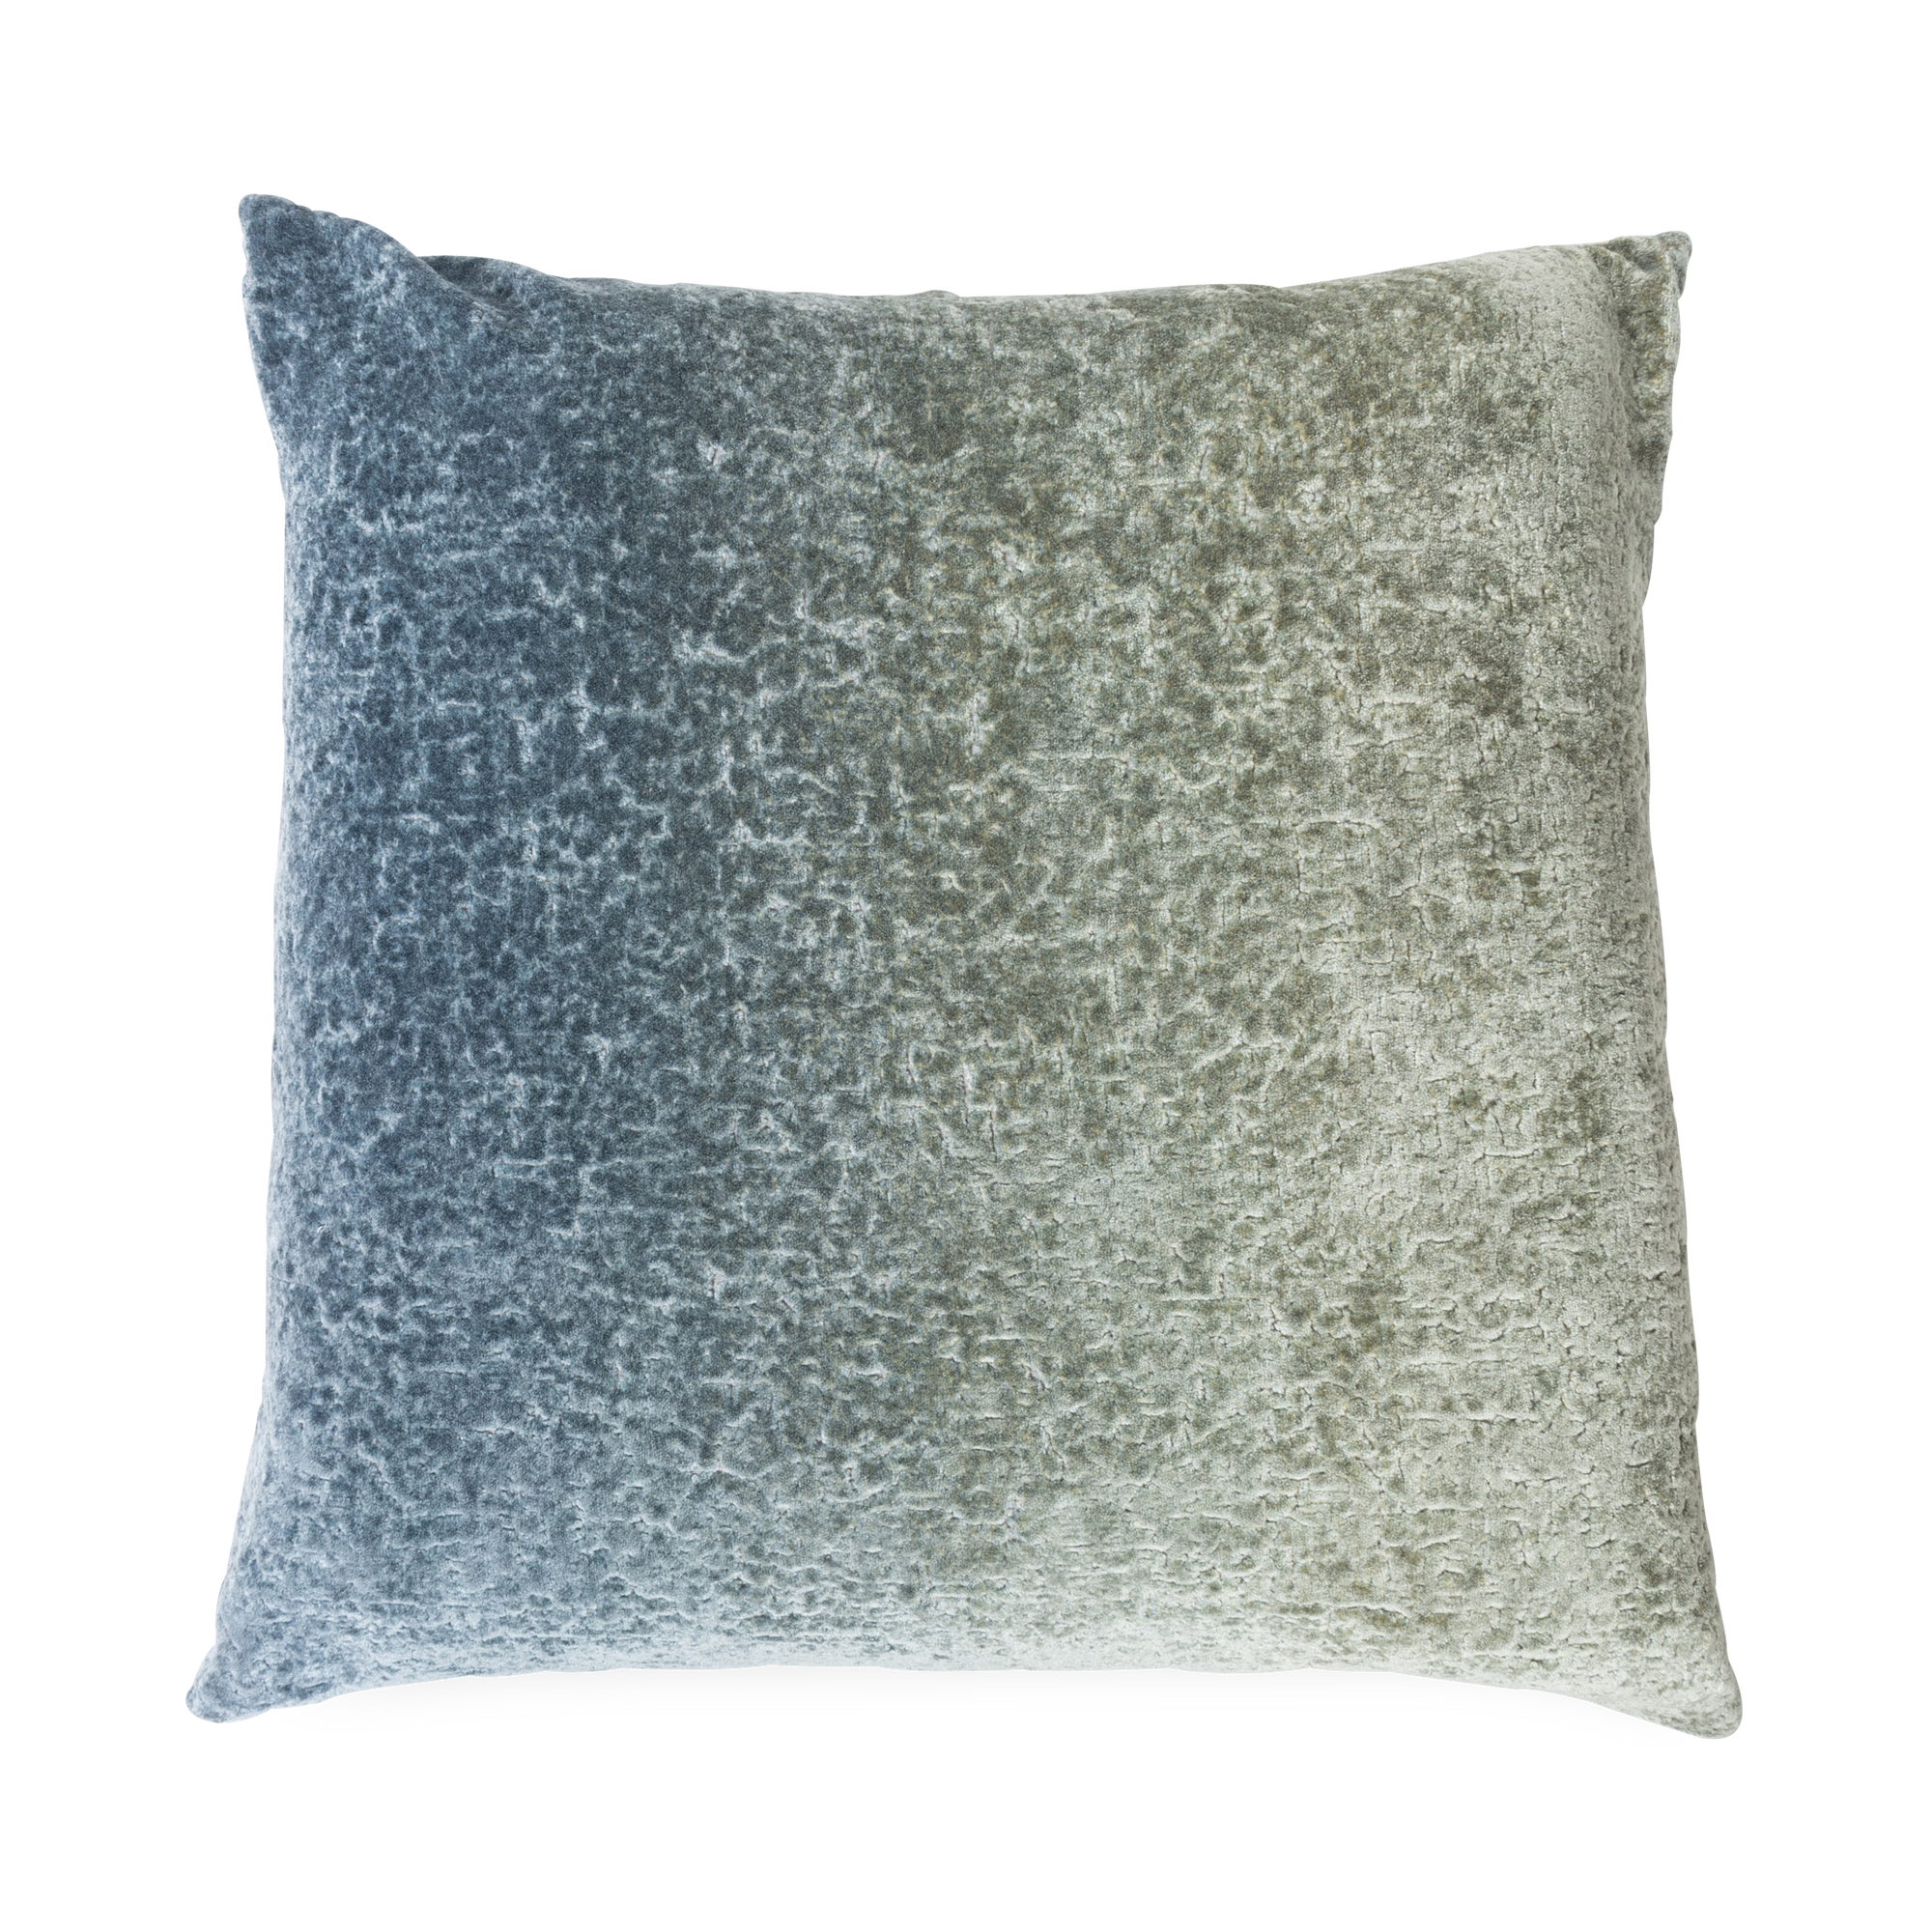 Made with high, soft pile, the Coral Pillow provides an incredibly plush velvet front fabric that will bring comfort to any sofa or bed.